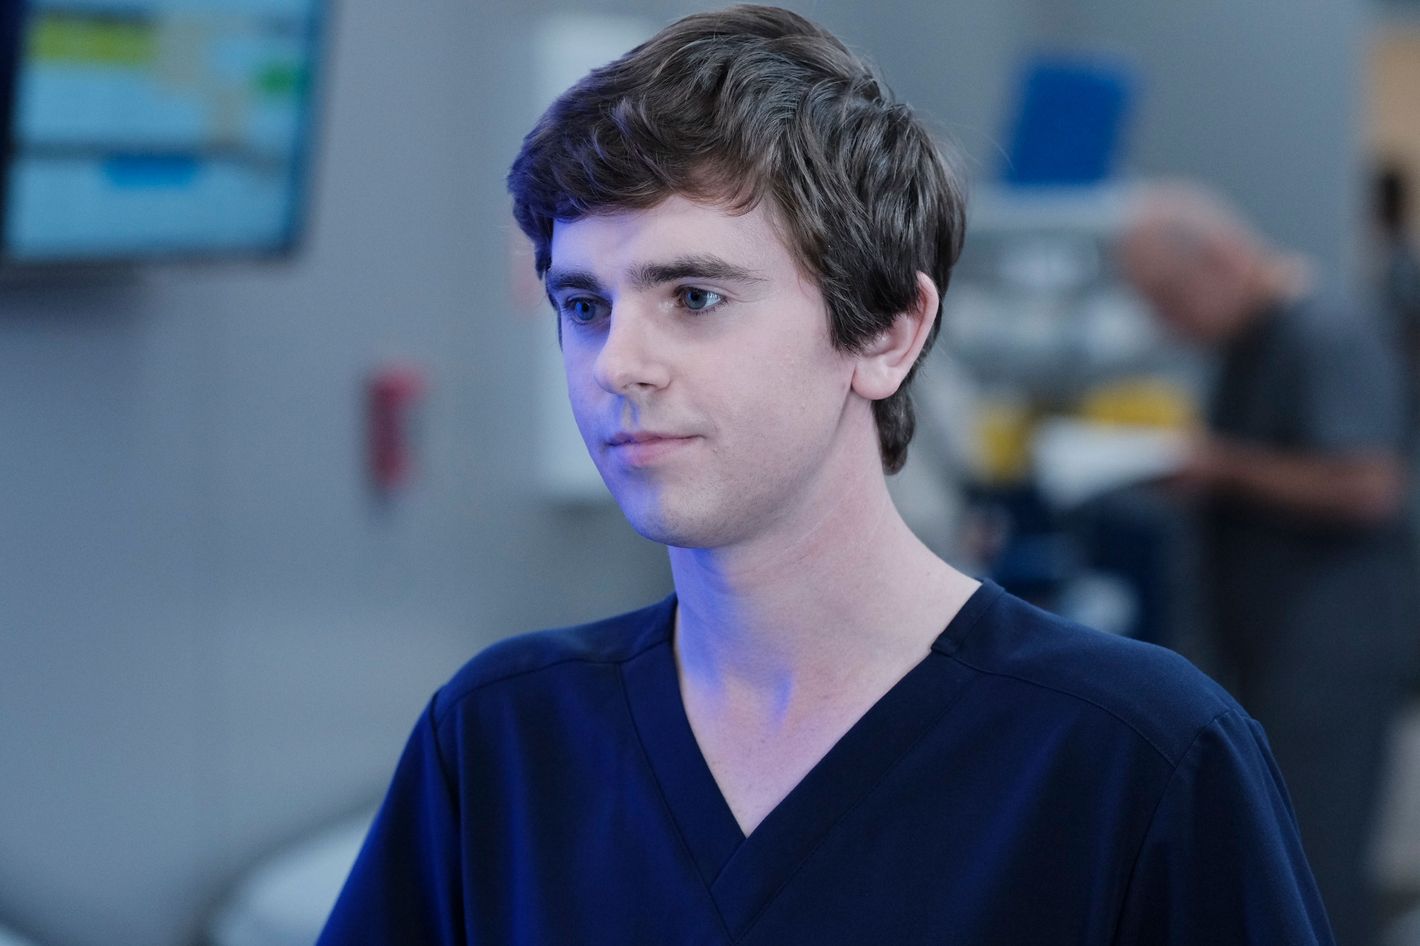 The Good Doctor' Star Freddie Highmore on Playing Someone With Autism